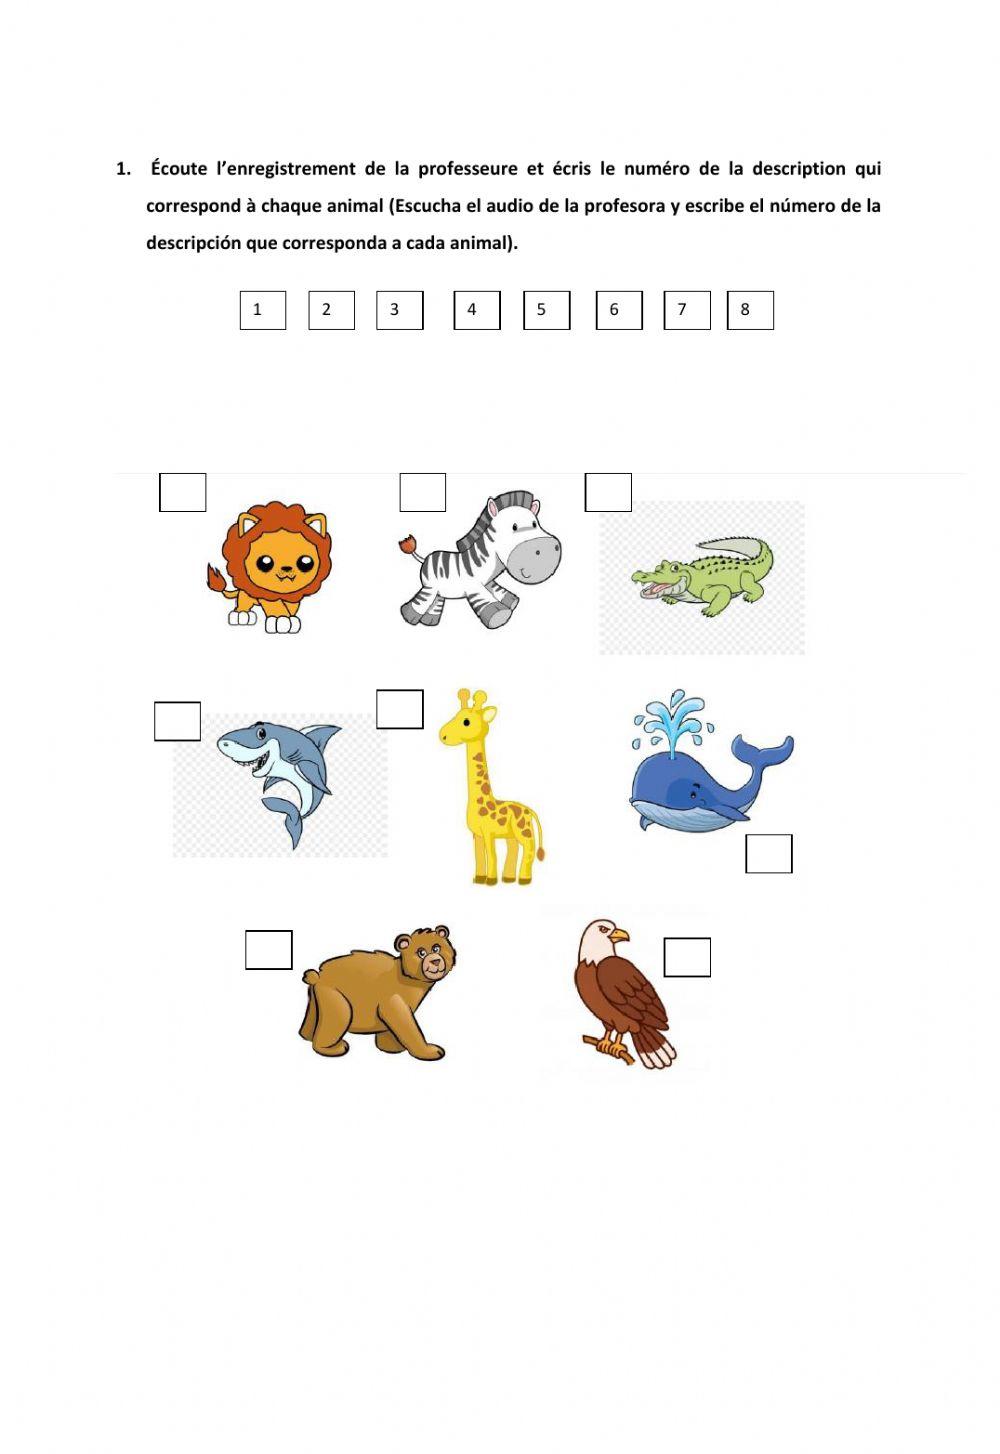 Les animaux sauvages interactive exercise